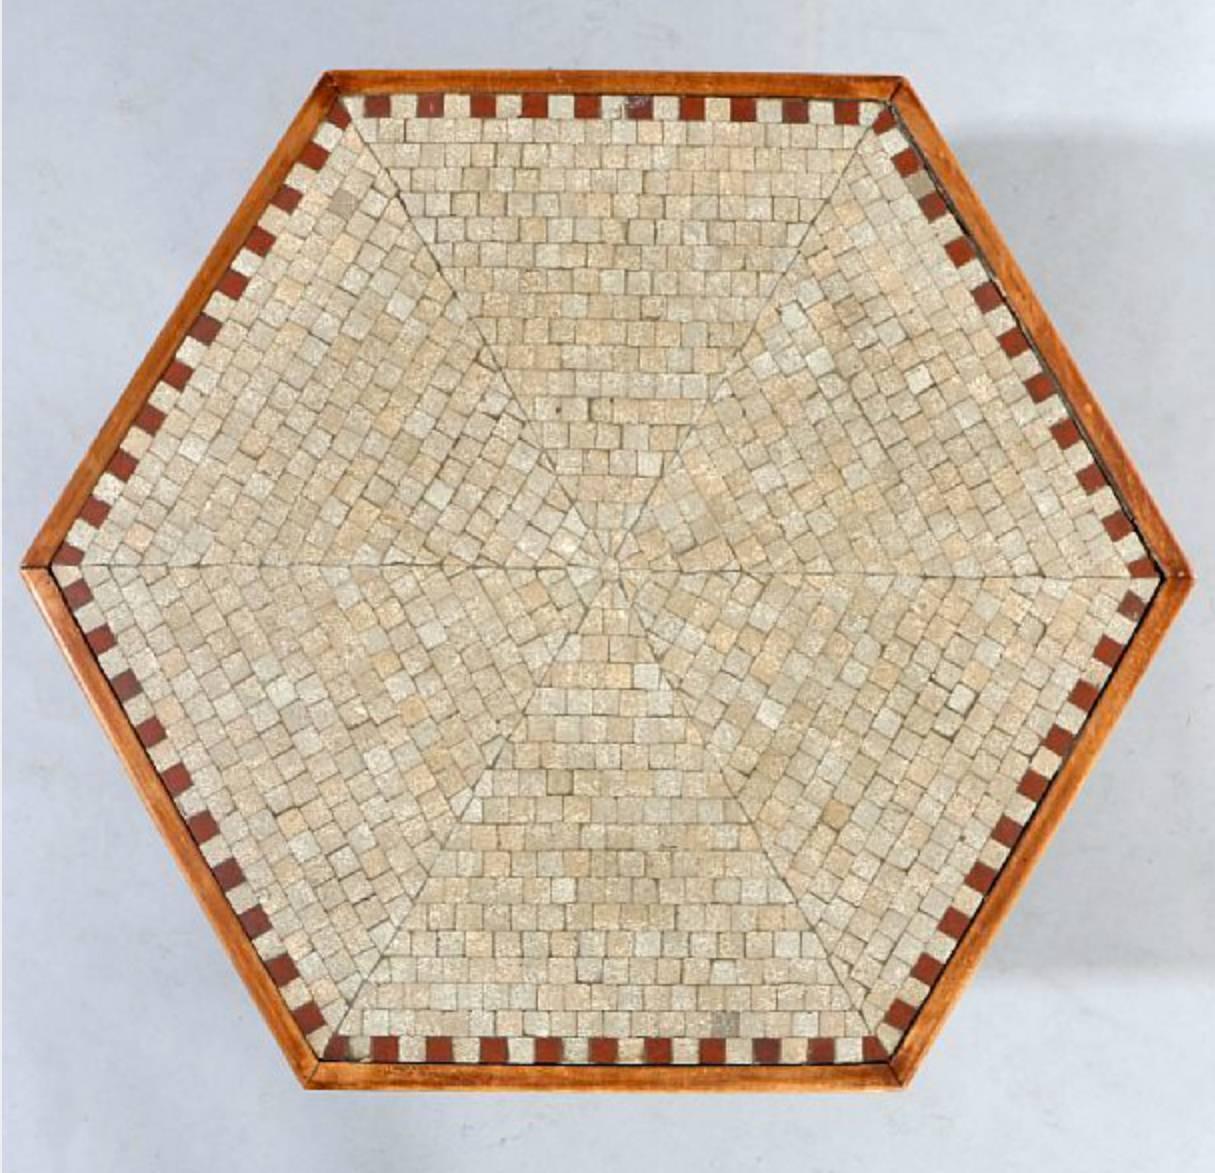 Scandinavian Modern Beech Coffee Table with Mosaic Inlays by a Danish Cabinetmaker, Denmark, 1950s For Sale